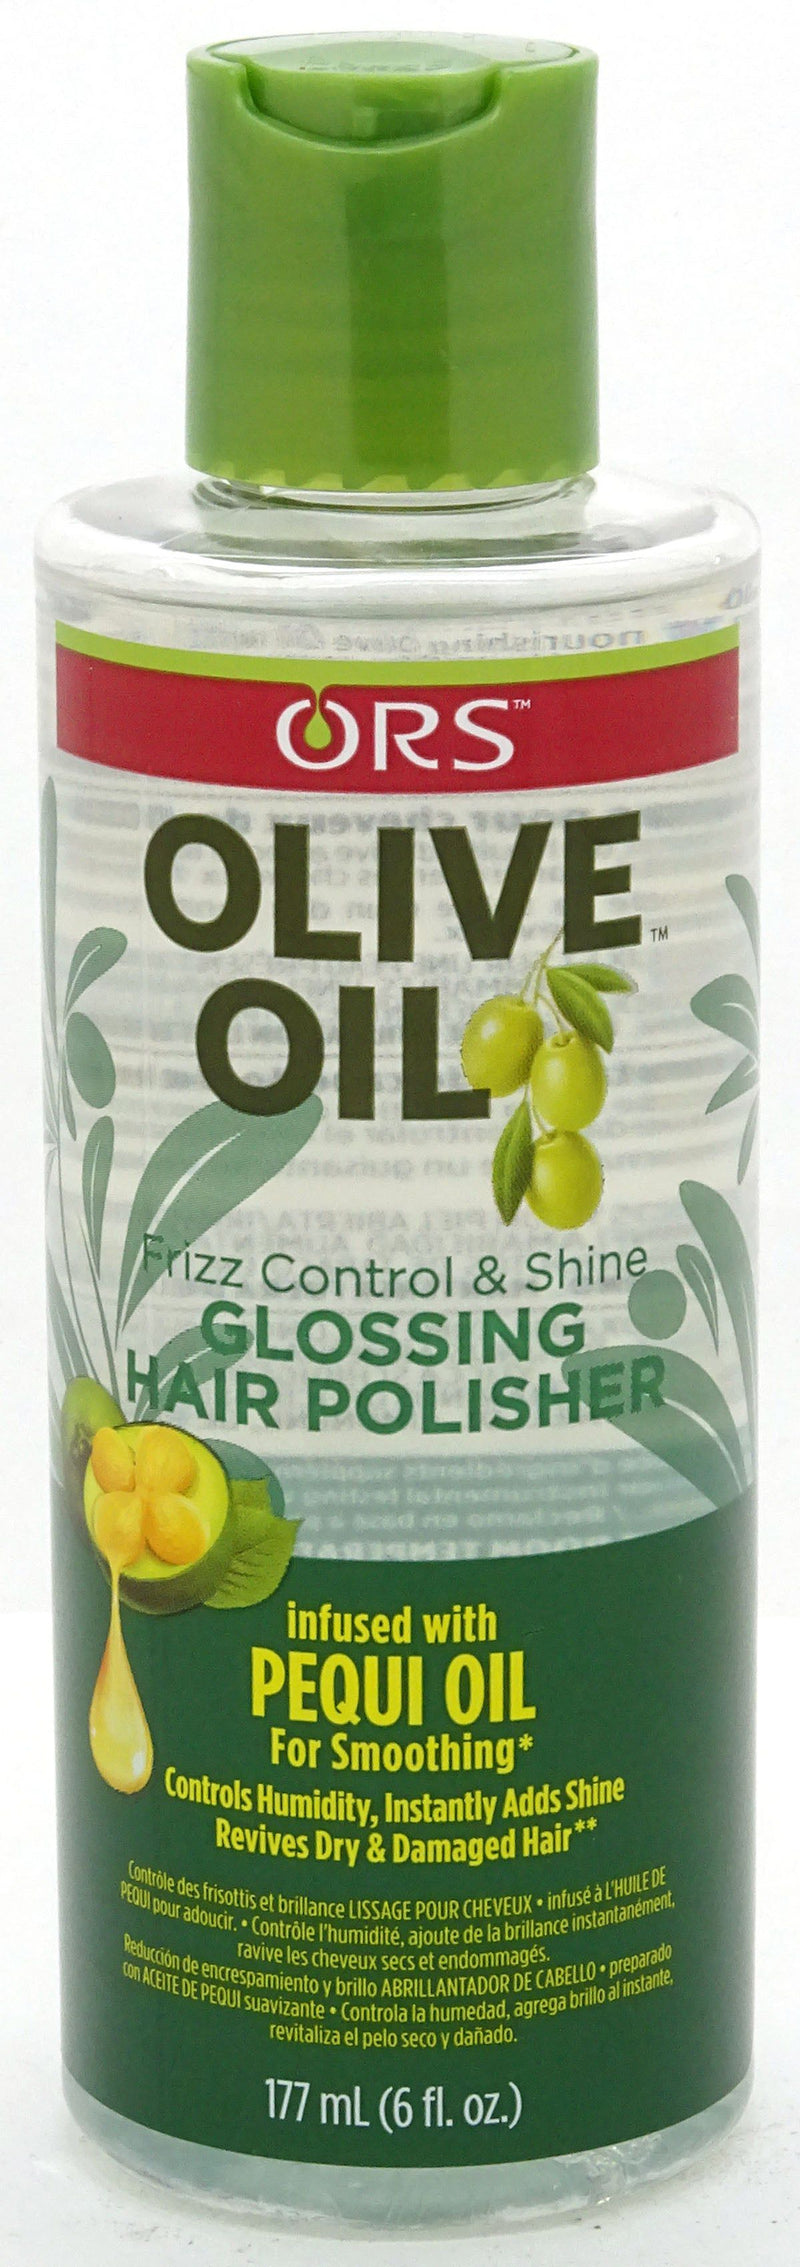 ORS ORS Olive Oil Glossing Hair Polisher 177ml 